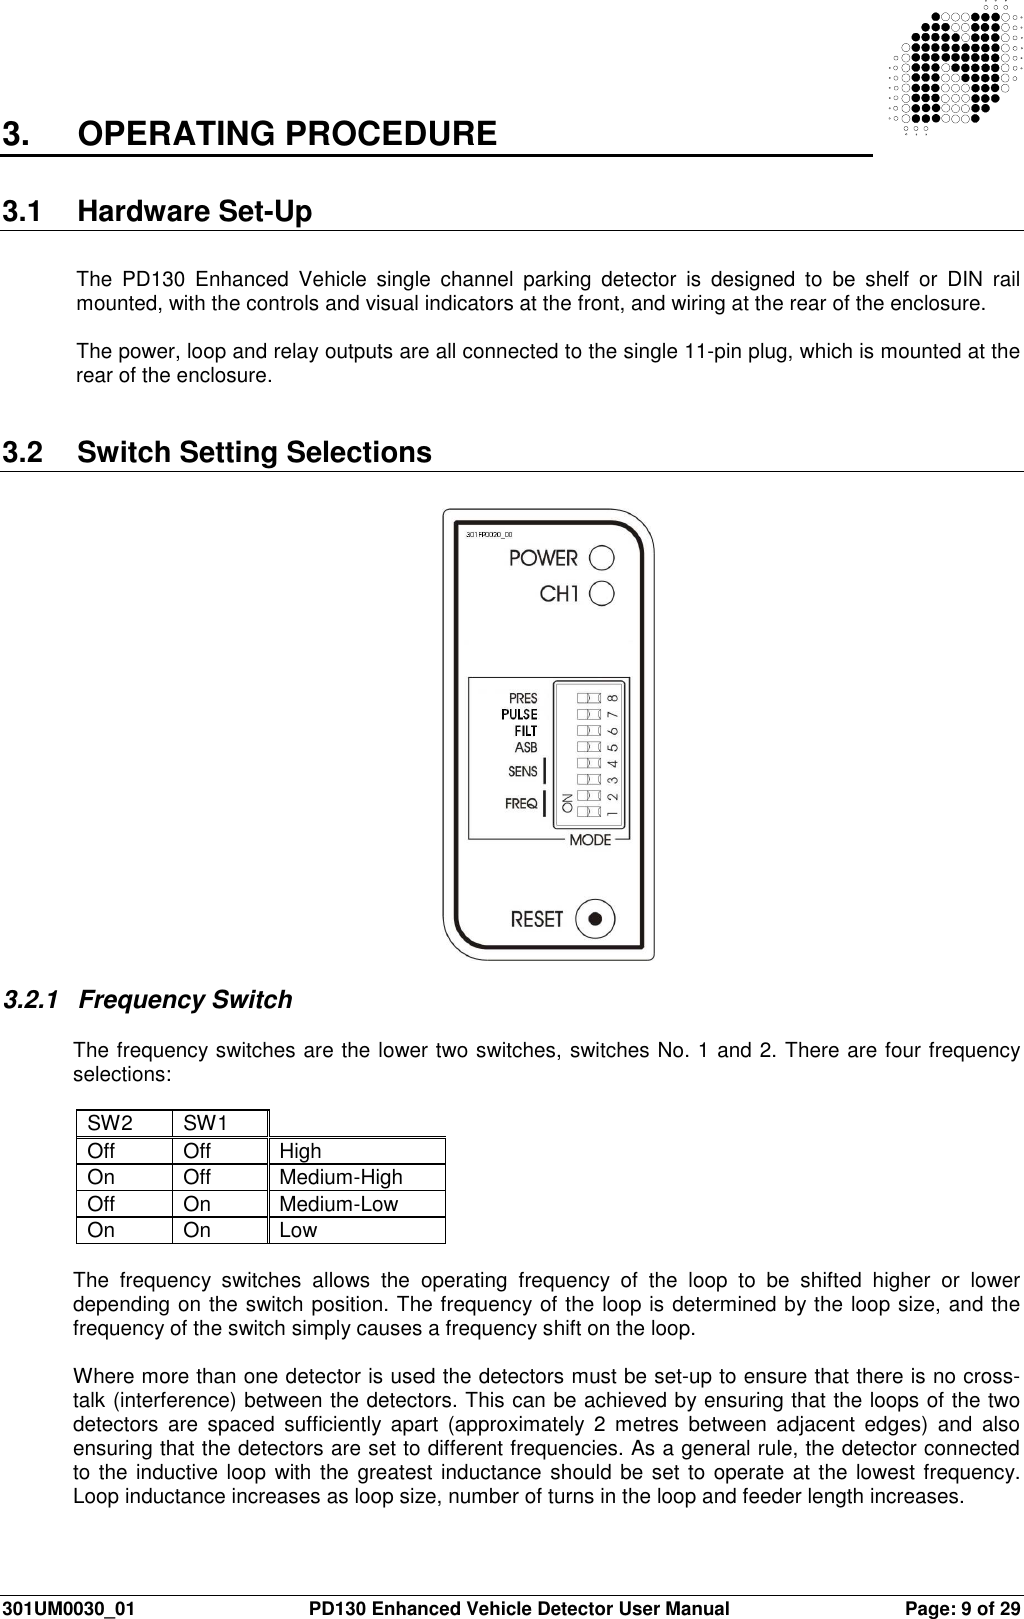  301UM0030_01  PD130 Enhanced Vehicle Detector User Manual  Page: 9 of 29   3.  OPERATING PROCEDURE  3.1  Hardware Set-Up  The  PD130  Enhanced  Vehicle  single  channel  parking  detector  is  designed  to  be  shelf  or  DIN  rail mounted, with the controls and visual indicators at the front, and wiring at the rear of the enclosure.  The power, loop and relay outputs are all connected to the single 11-pin plug, which is mounted at the rear of the enclosure.   3.2  Switch Setting Selections    3.2.1  Frequency Switch  The frequency switches are the lower two switches, switches No. 1 and 2. There are four frequency selections:  SW2  SW1   Off  Off  High On  Off  Medium-High Off  On  Medium-Low On  On  Low  The  frequency  switches  allows  the  operating  frequency  of  the  loop  to  be  shifted  higher  or  lower depending on the switch position. The frequency of the loop is determined by the loop size, and the frequency of the switch simply causes a frequency shift on the loop.  Where more than one detector is used the detectors must be set-up to ensure that there is no cross-talk (interference) between the detectors. This can be achieved by ensuring that the loops of the two detectors  are  spaced  sufficiently  apart  (approximately  2  metres  between  adjacent  edges)  and  also ensuring that the detectors are set to different frequencies. As a general rule, the detector connected to the inductive loop with the greatest inductance should be set to operate at the lowest frequency. Loop inductance increases as loop size, number of turns in the loop and feeder length increases.  